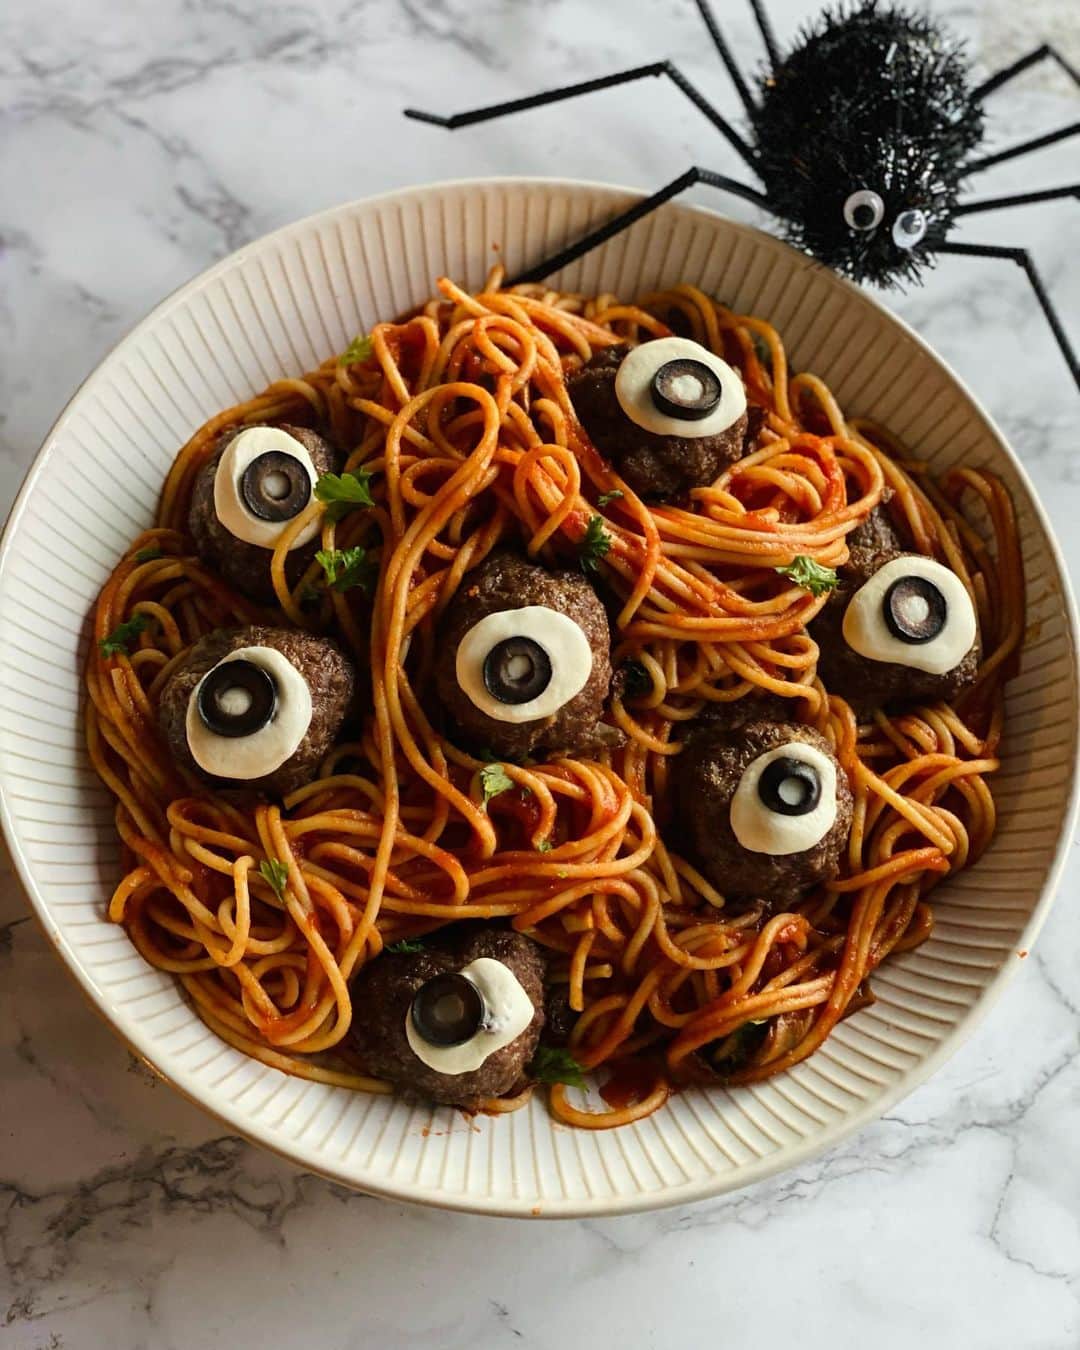 Antonietteのインスタグラム：「As I’m cooking in the kitchen  everyone is wondering what’s for dinner, and I tell them, “Something eye-deal! Why don’t you all take a look! 👀 🍝Freaked the heck out of them! 🤮😆 Good ol’ spaghetti with meatball eyes made with ciliegine cheese and olives. Happy Halloween! 👻」